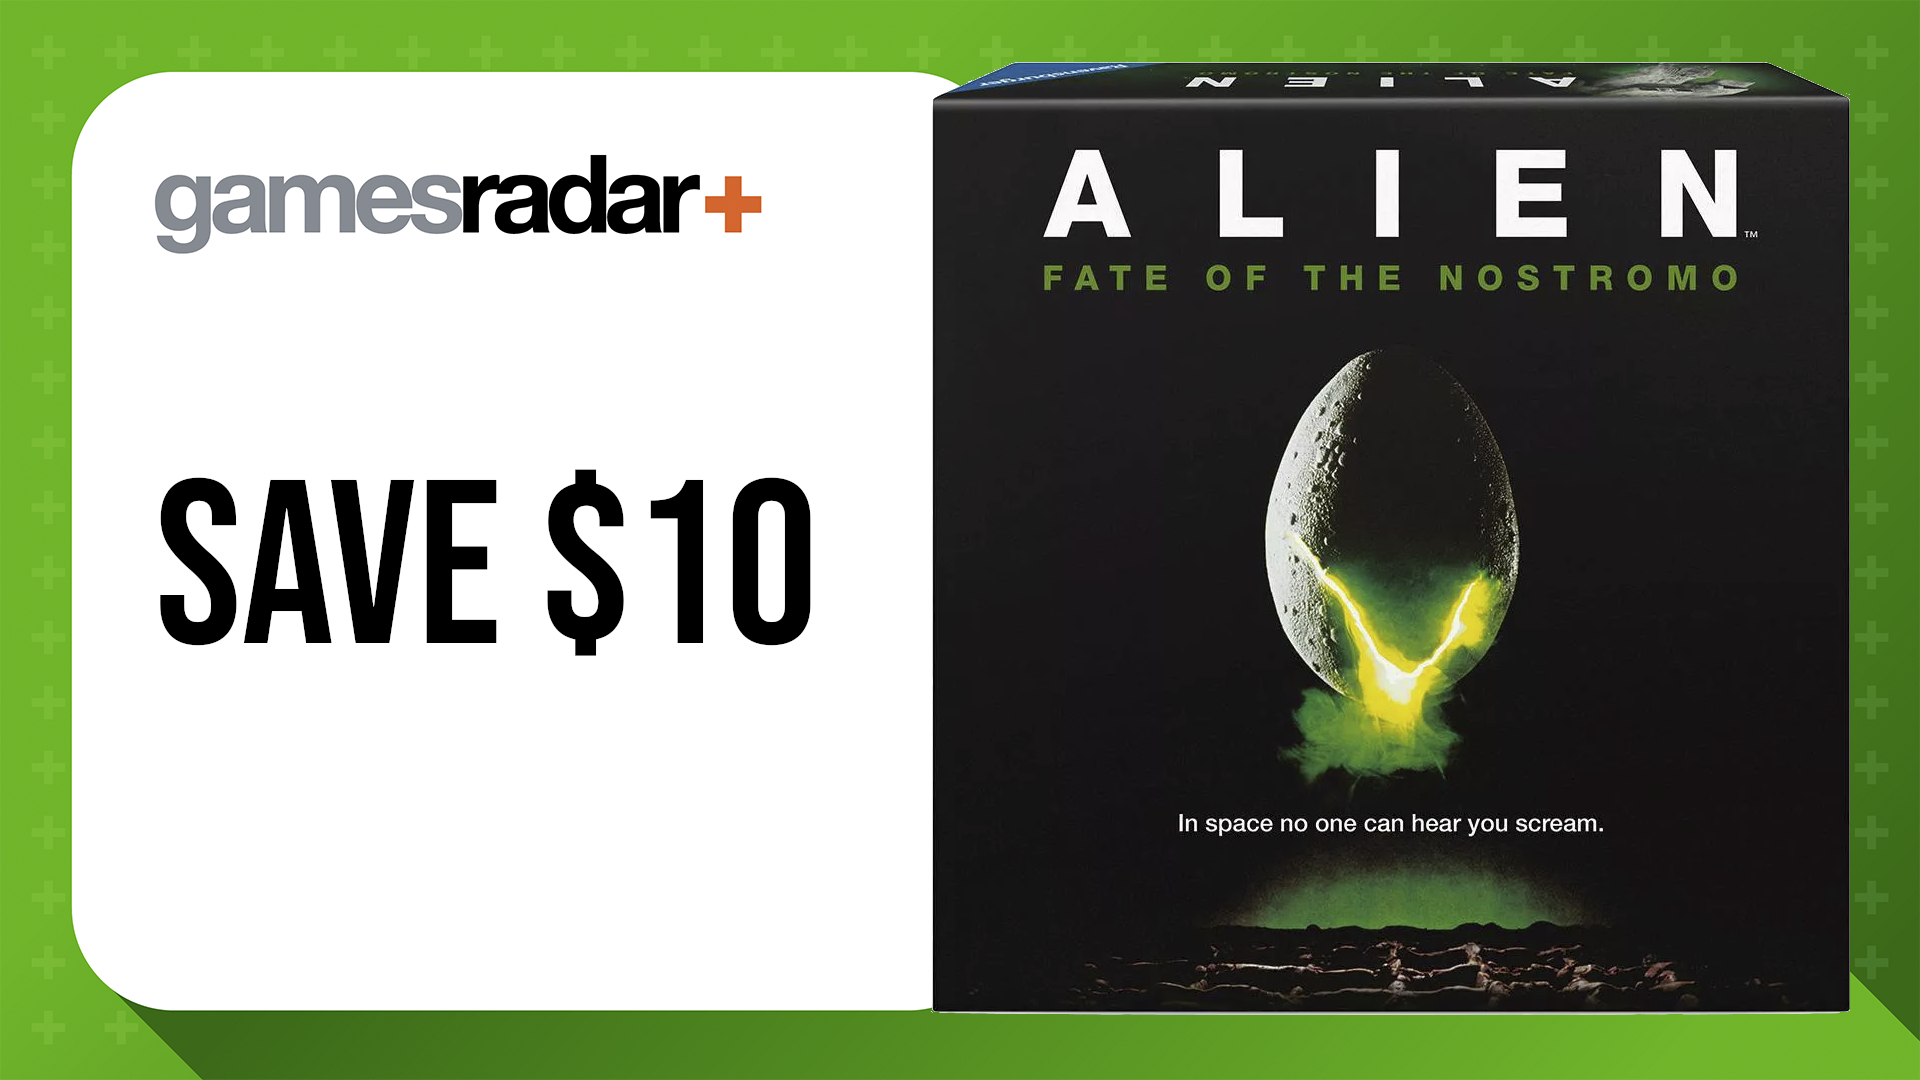 Black Friday board game deals with Alien: Fate of the Nostromo